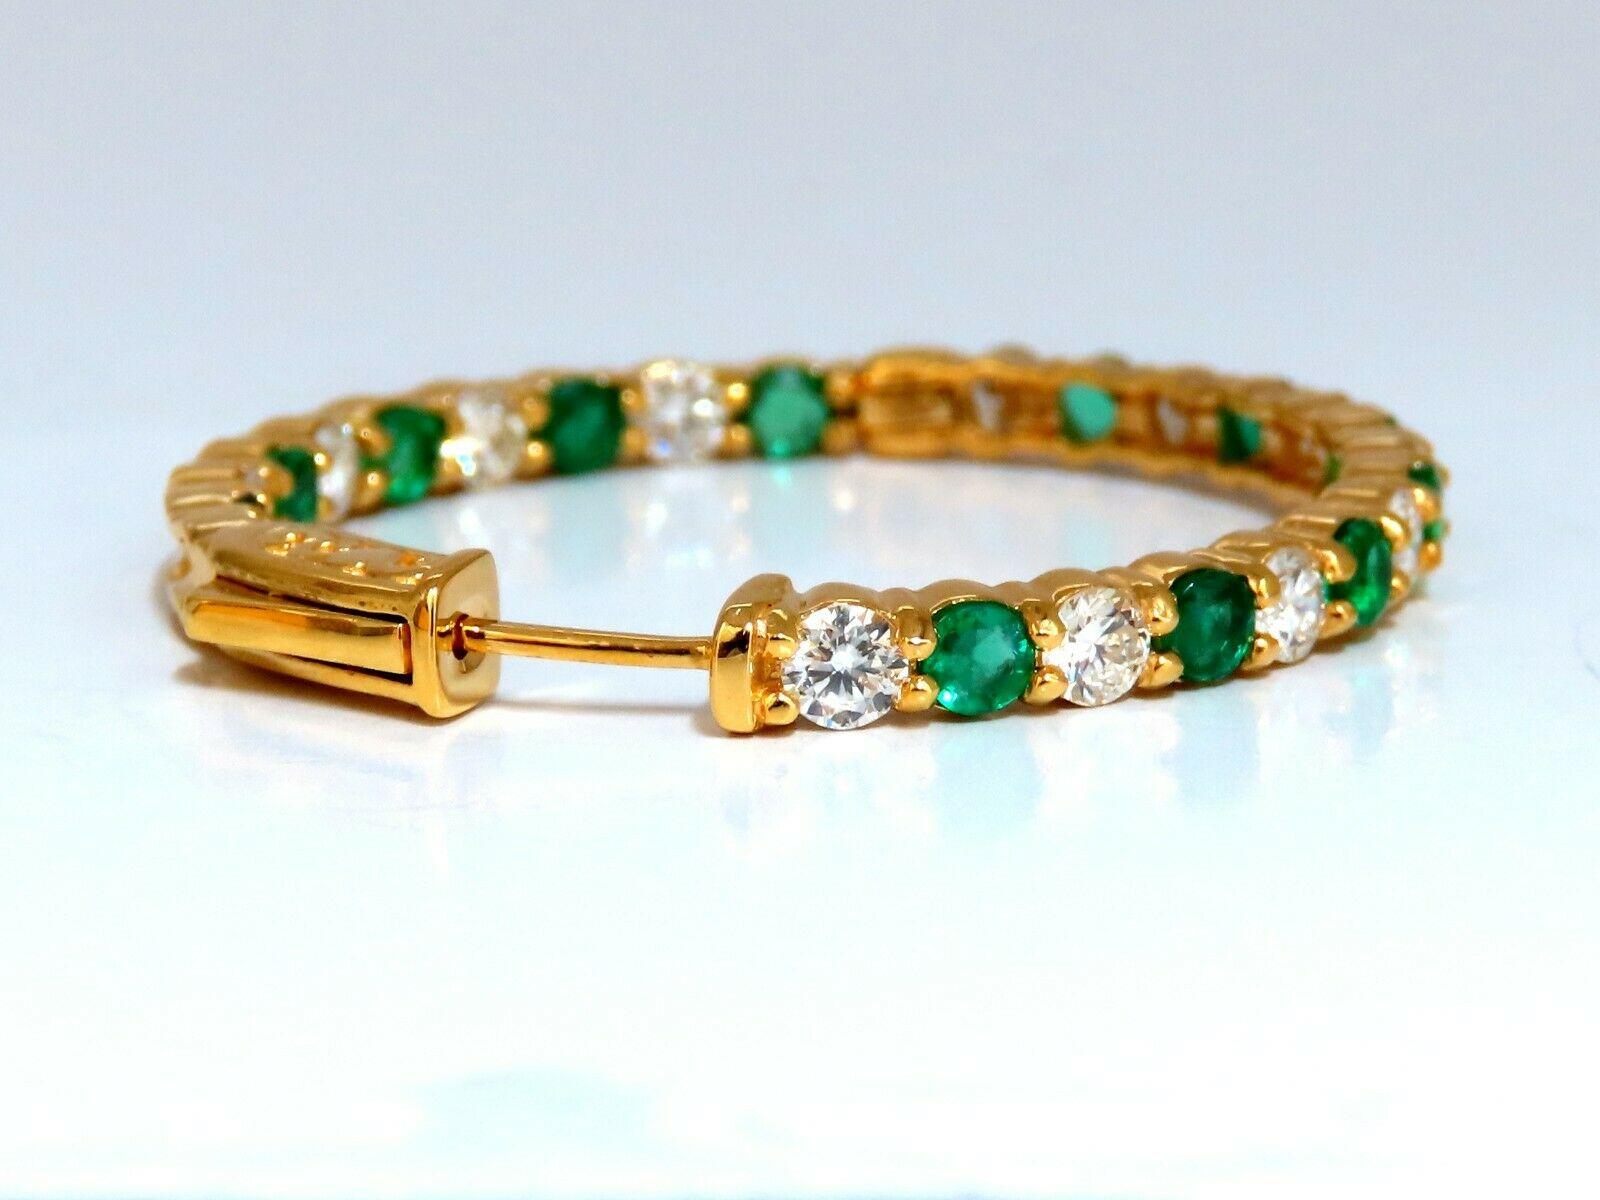 3.77ct Natural Emerald Diamonds Hoop Earrings 14kt Yellow Gold Inside Out For Sale 2